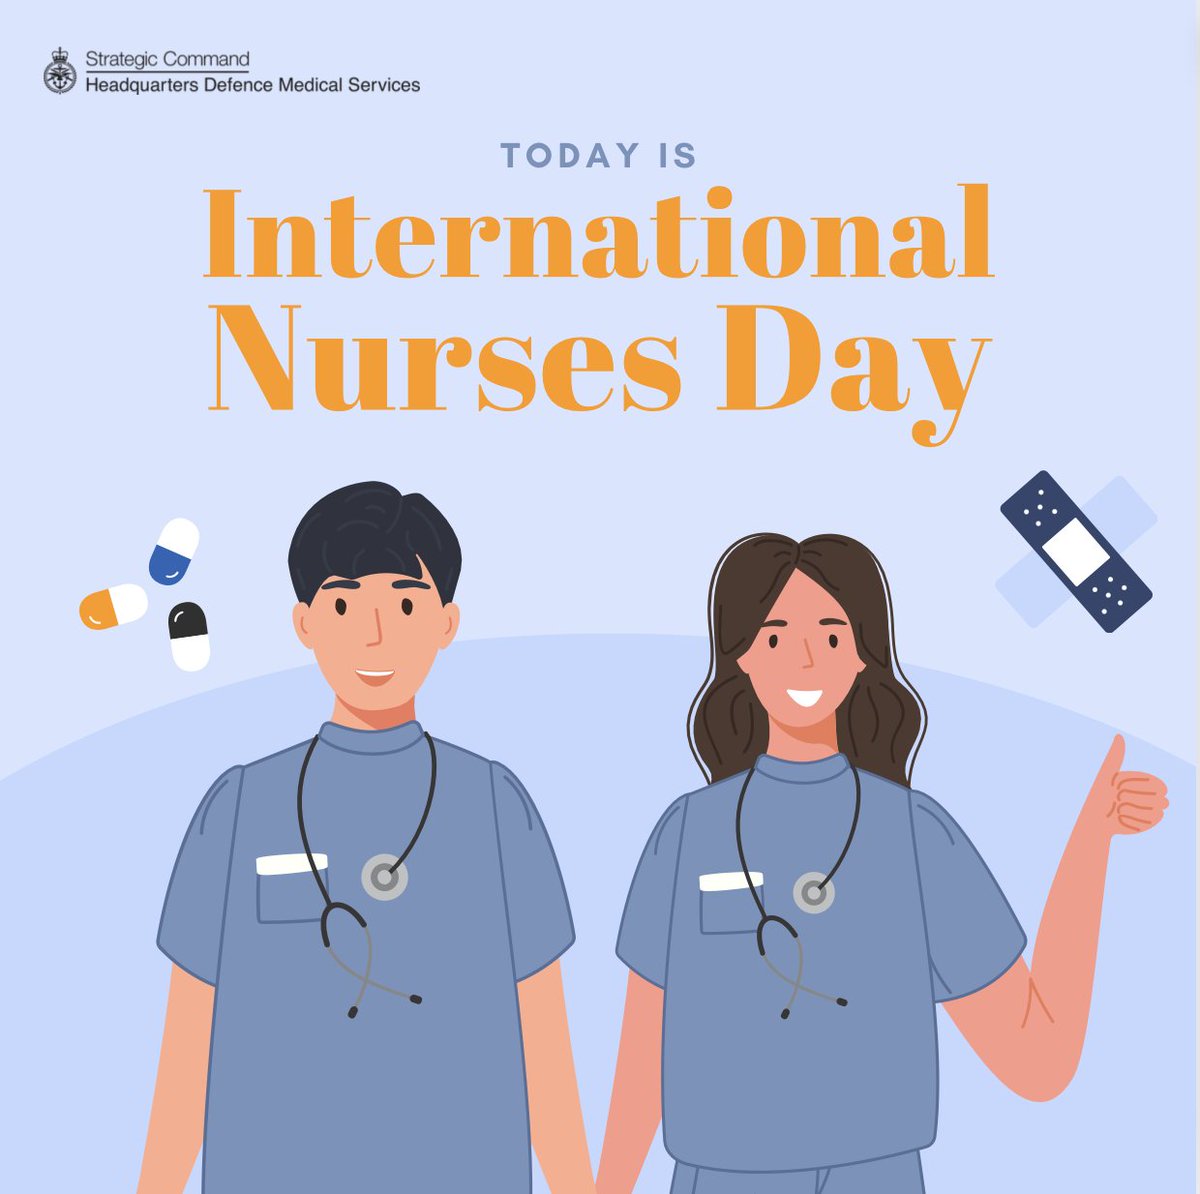 Let's take a moment to appreciate & celebrate the incredible dedication, compassion, & hard work of #Nurses around the world. Their selfless commitment to providing quality care & comfort to those in need does not go unnoticed. They play such a vital role in our healthcare 💙👩‍⚕️👨‍⚕️